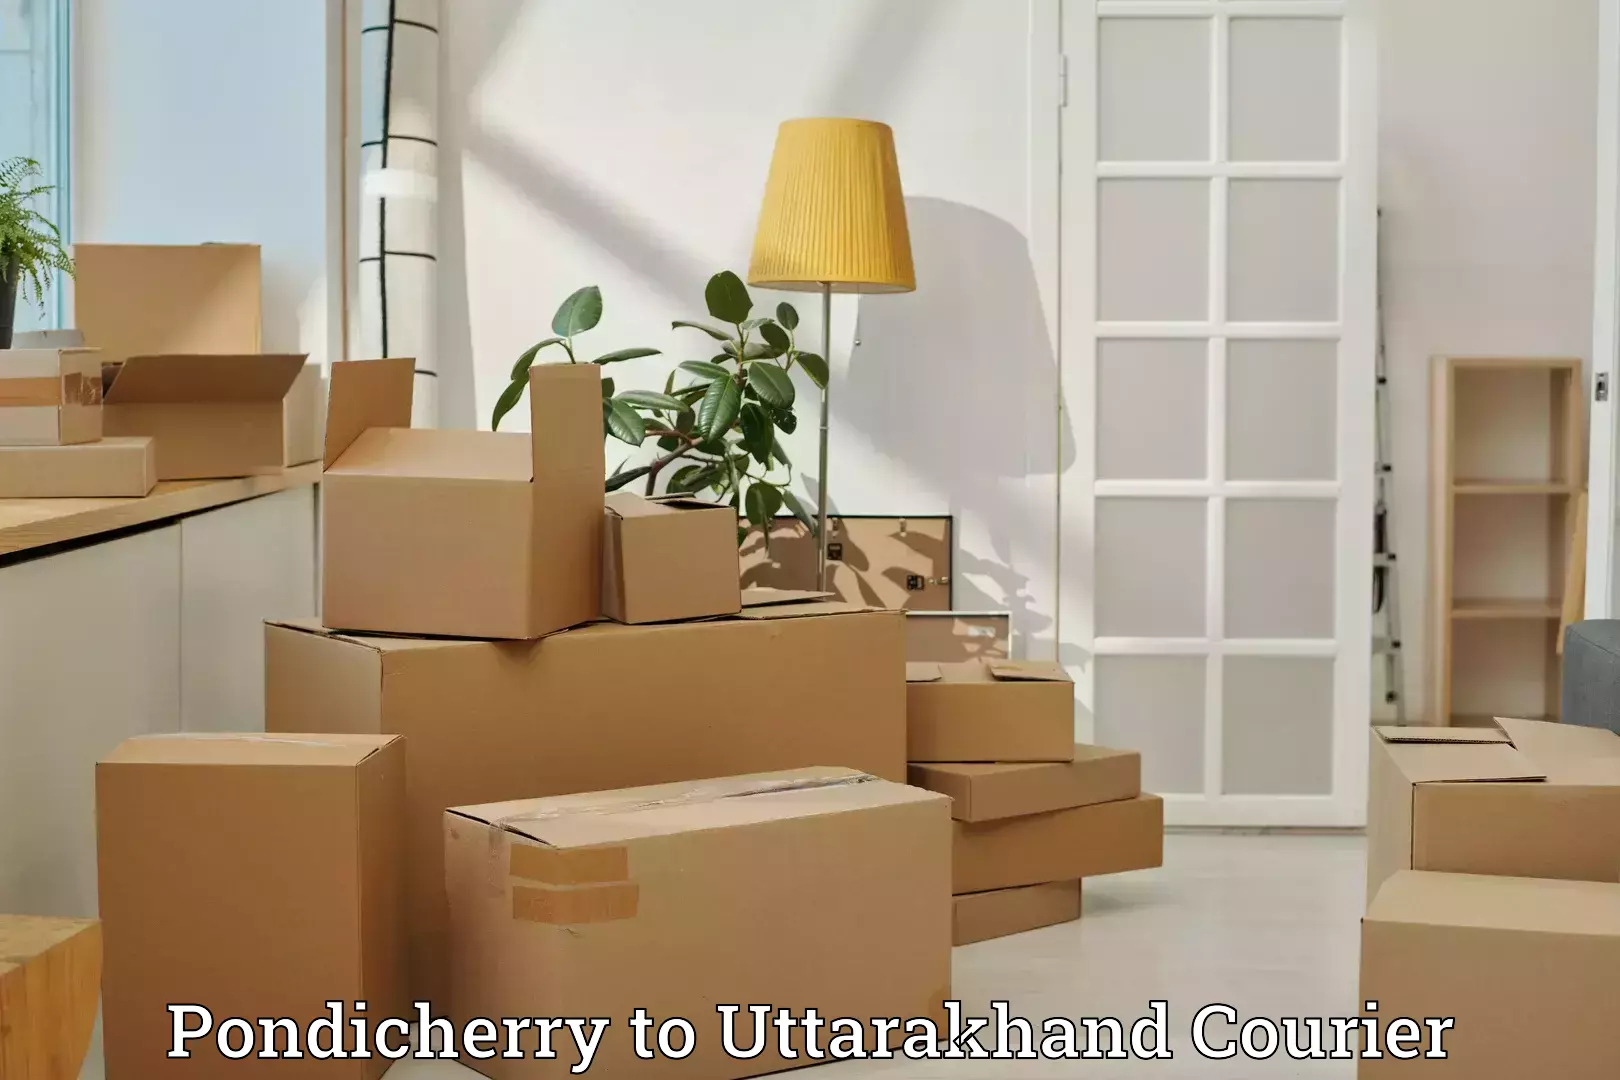 Luggage delivery network Pondicherry to Rishikesh